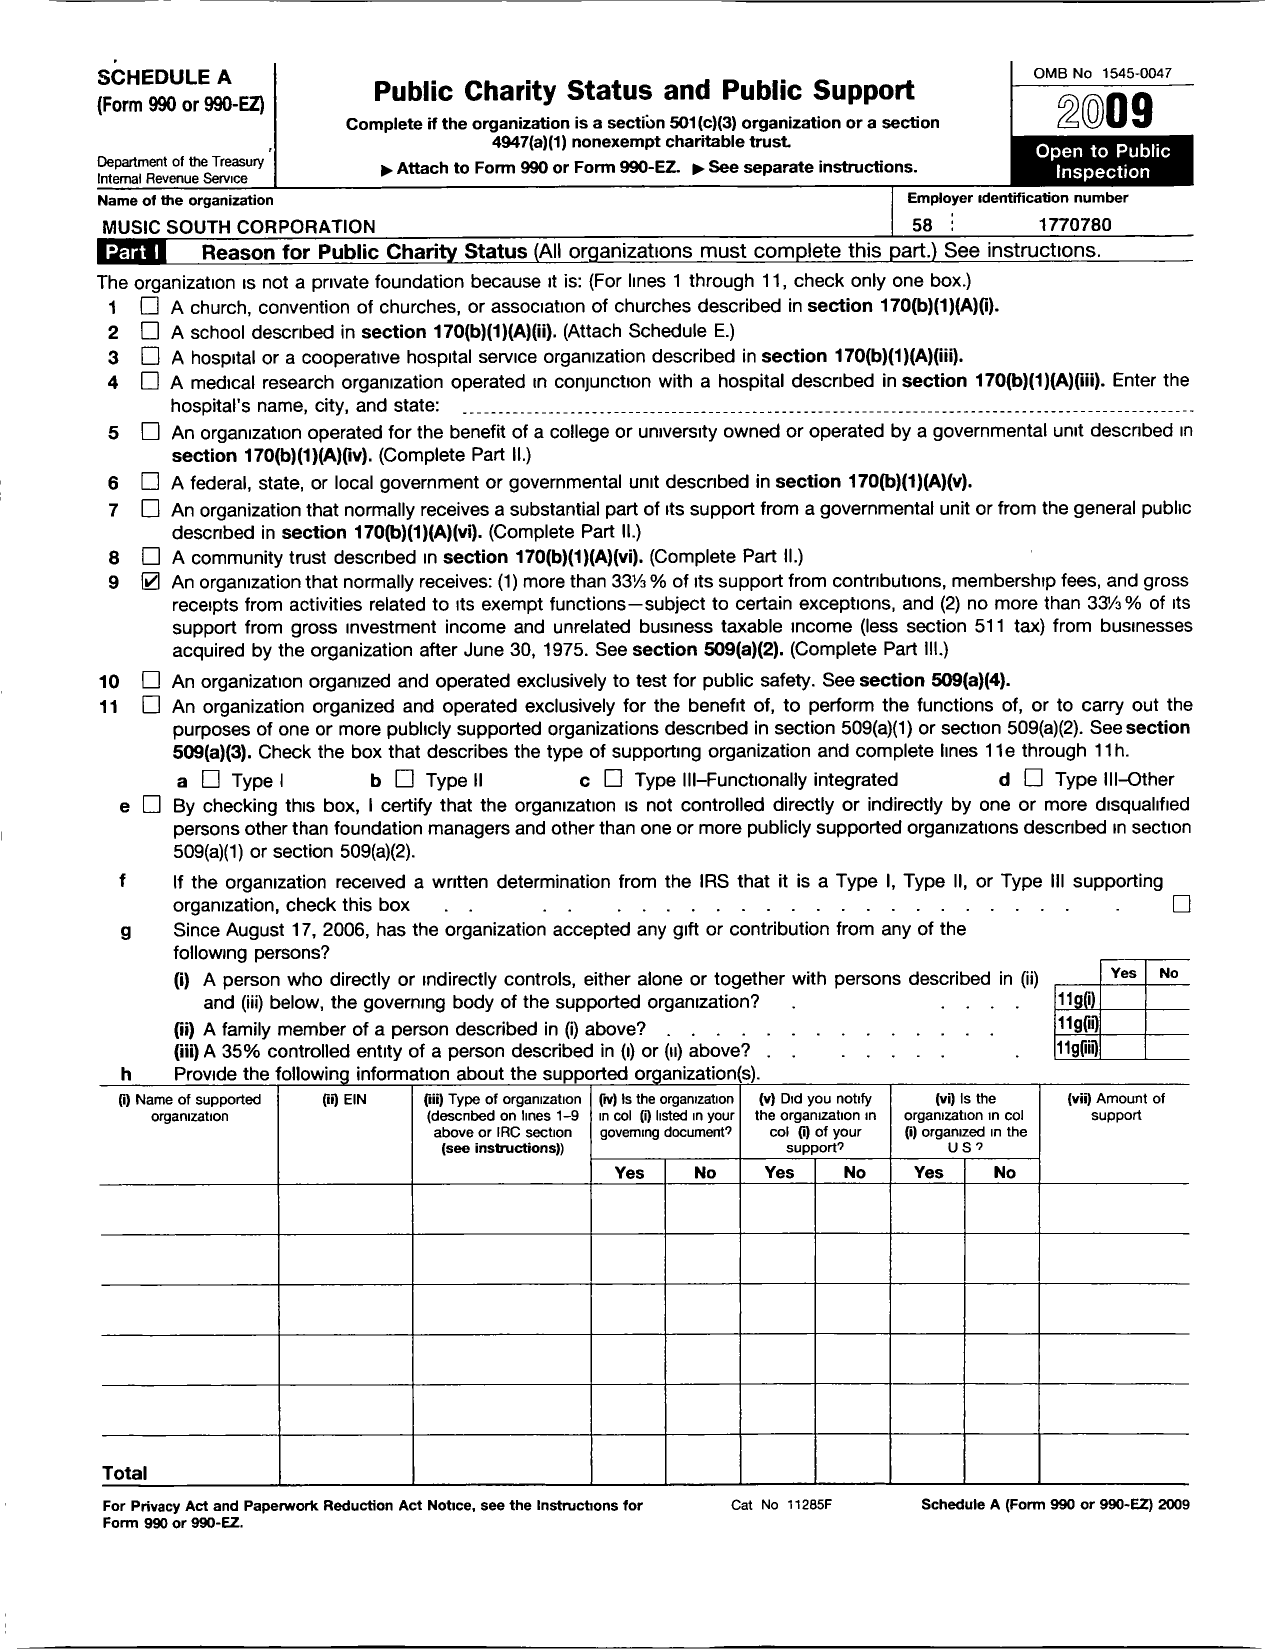 Image of first page of 2009 Form 990ER for Music South Corporation (MSC)